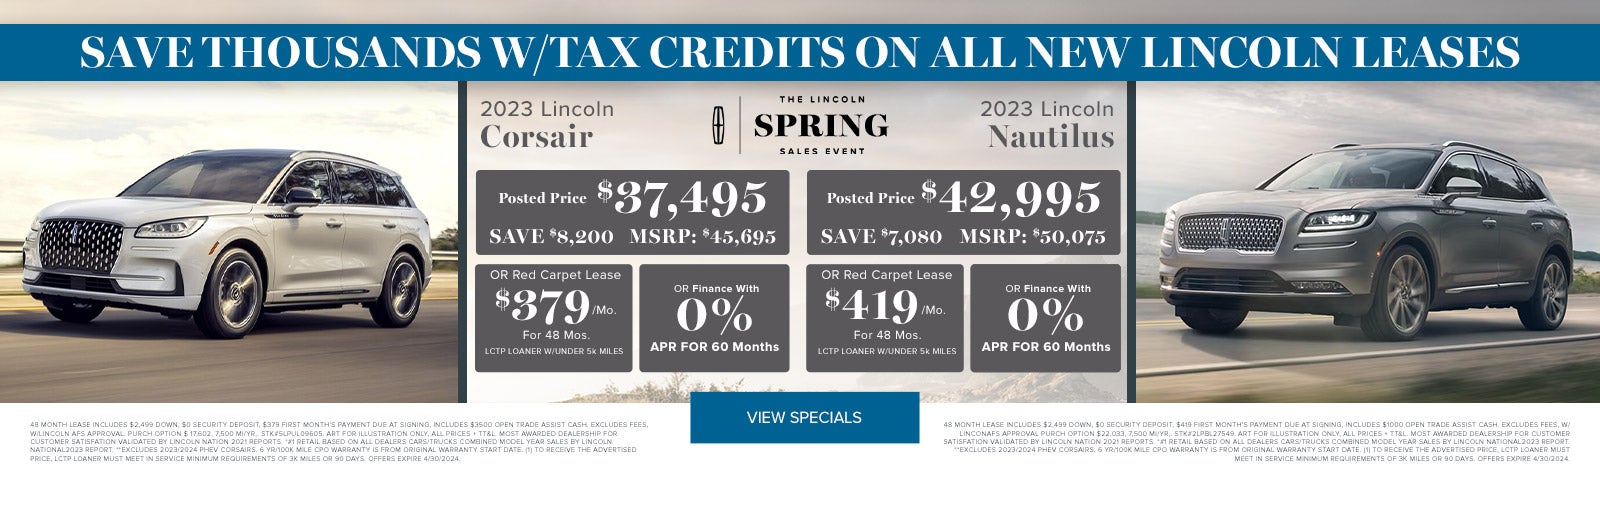 2023 Lincoln Corsair and Nautilus 0% for 60 months April 24